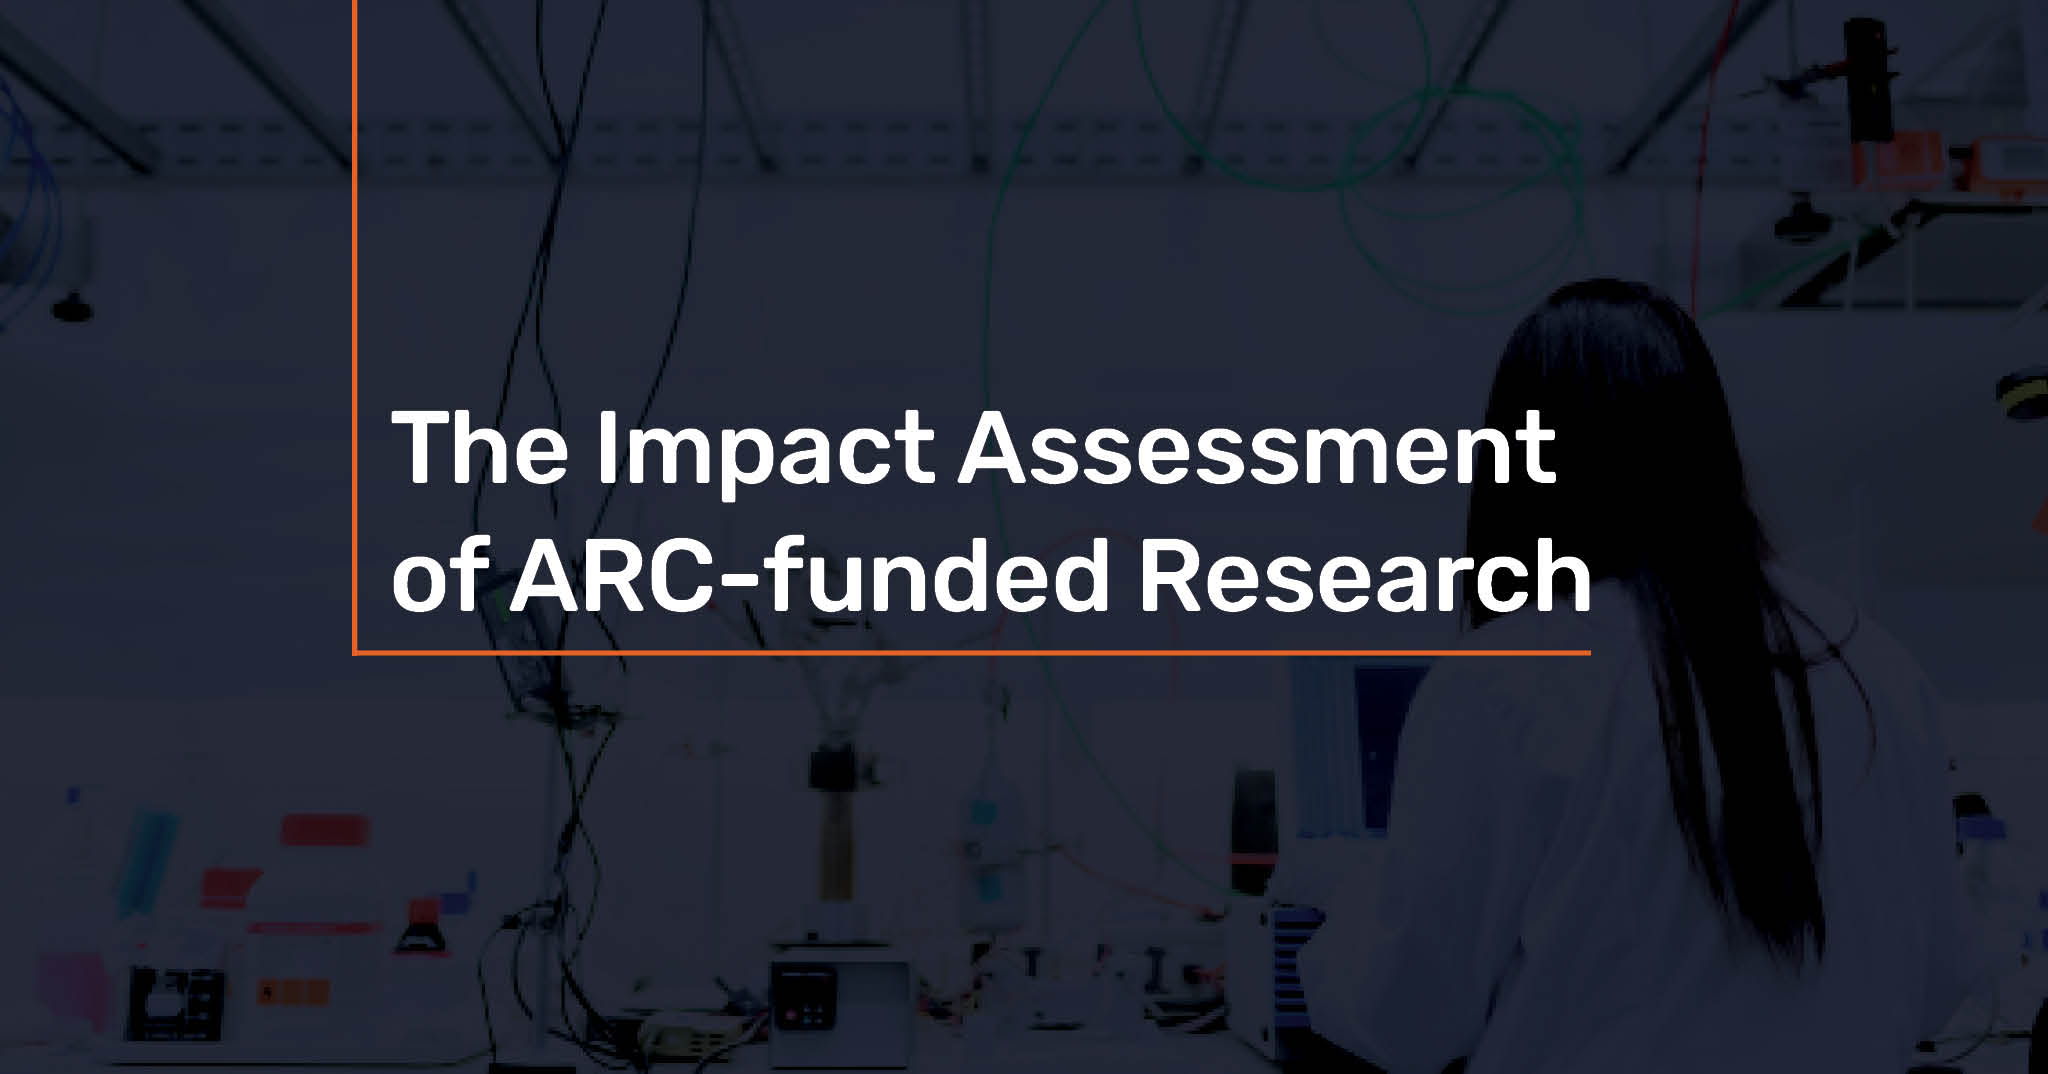 "The Impact Assessment of ARC-funded Research"